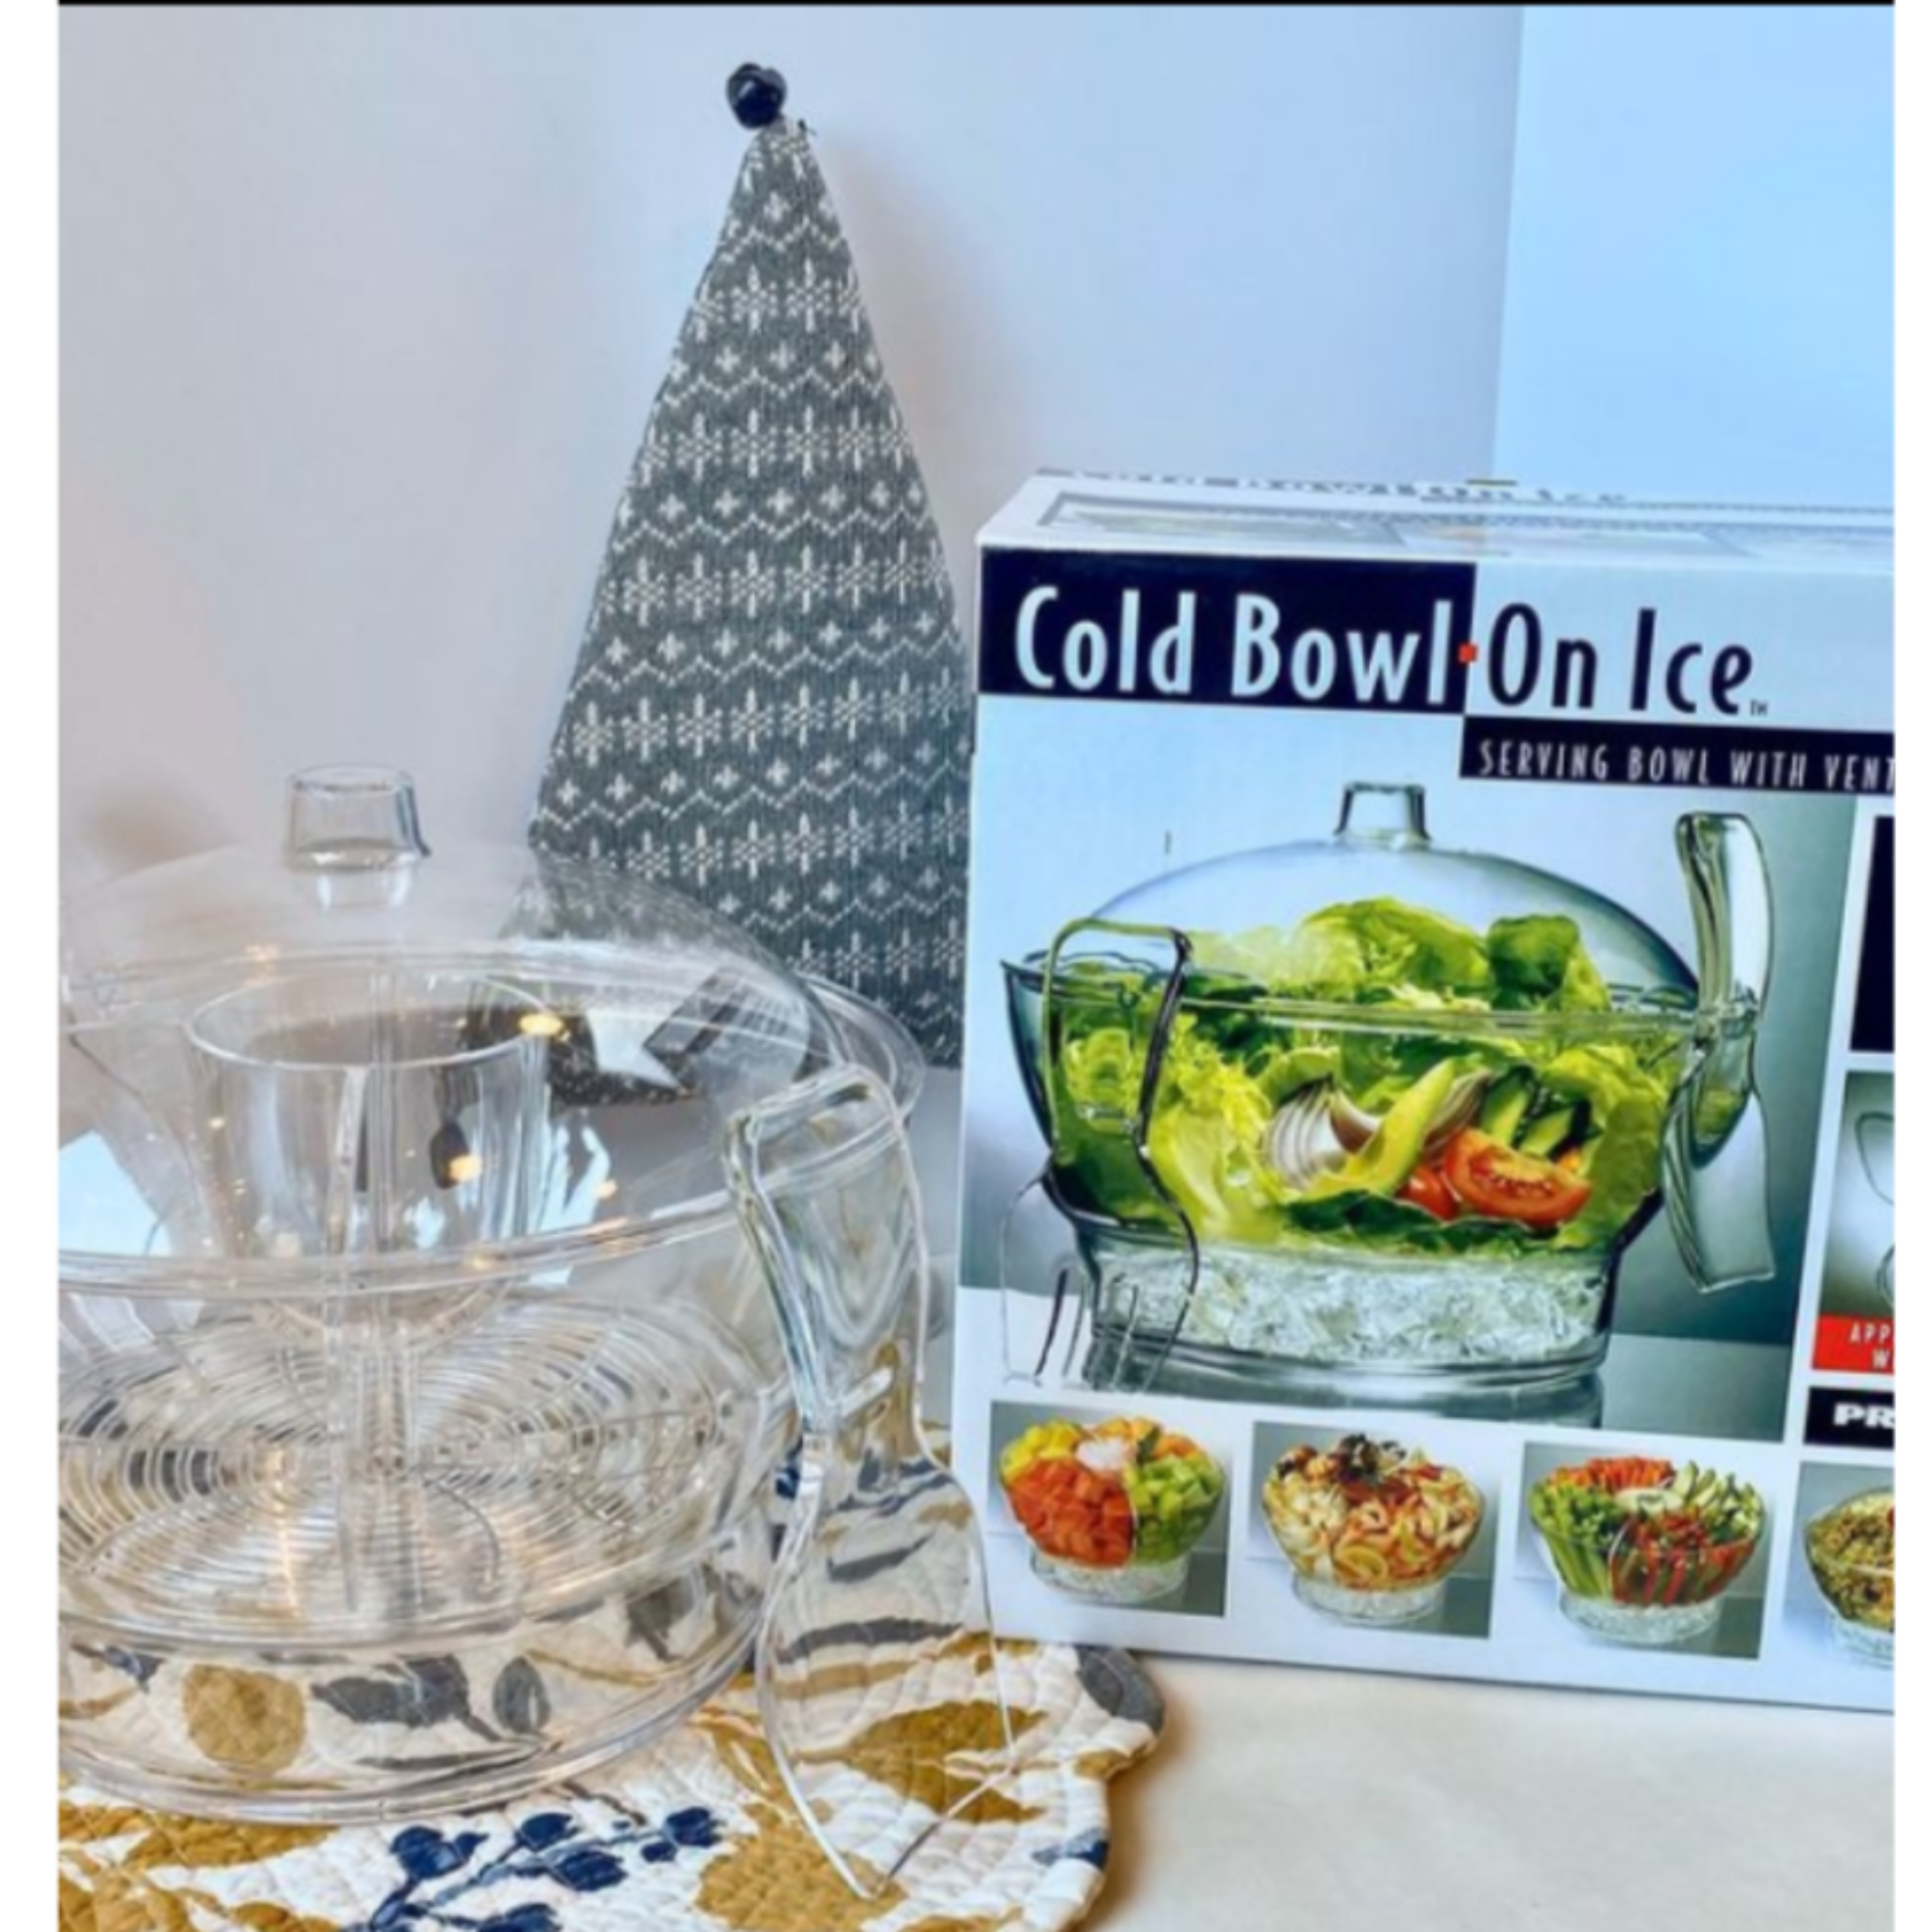 Cold Bowl on Ice